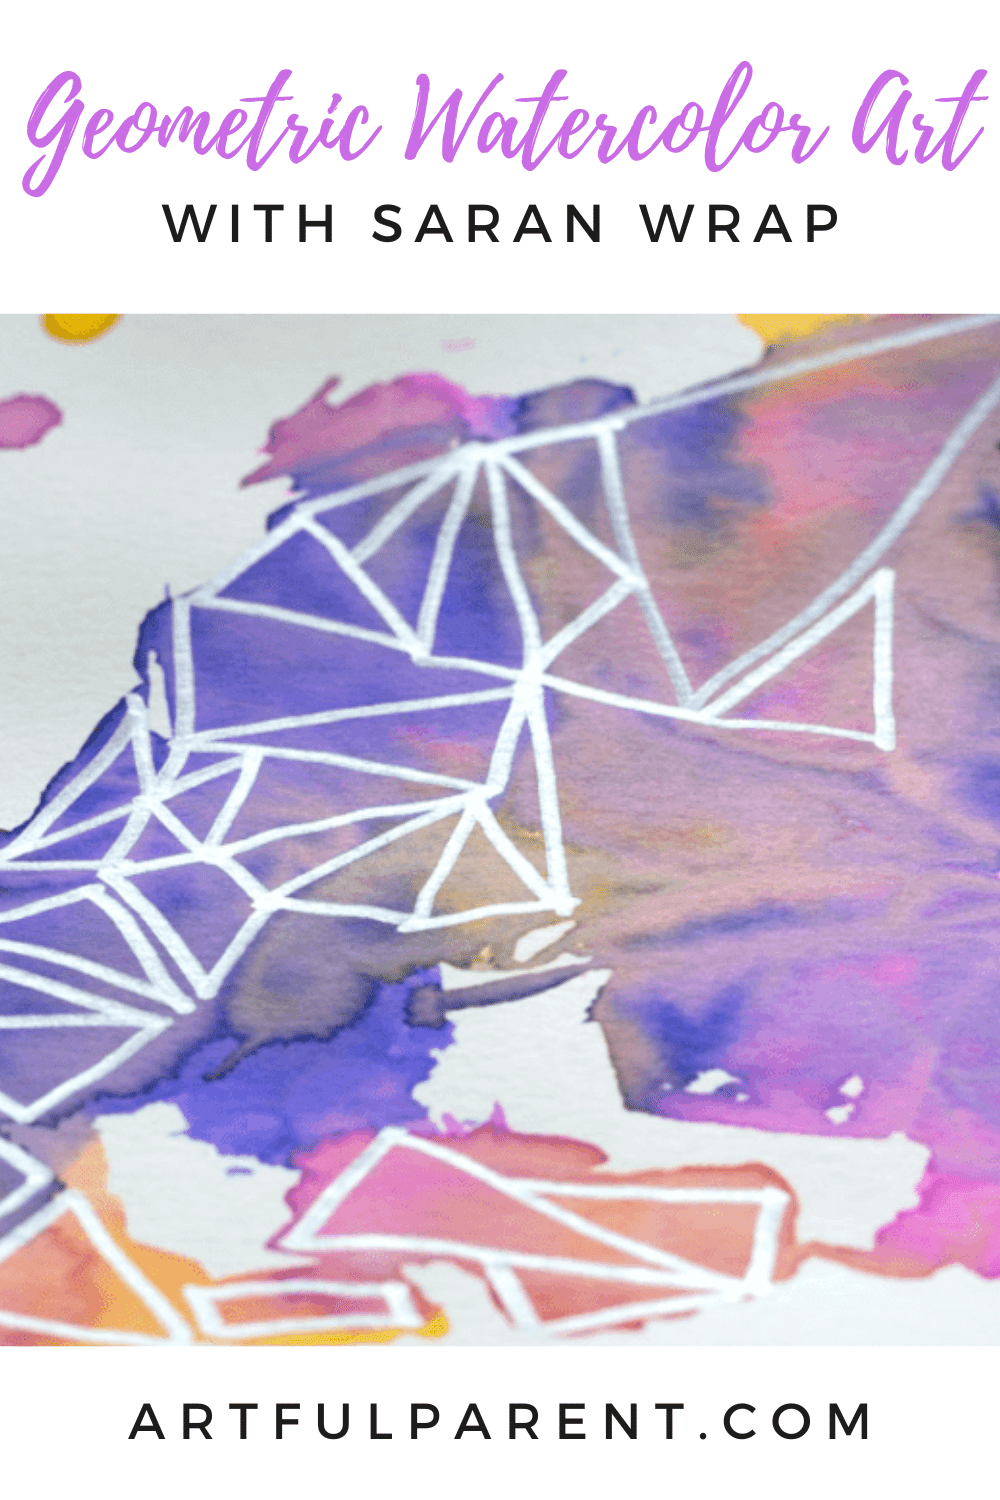 How to Do Plastic Wrap Painting with Watercolors